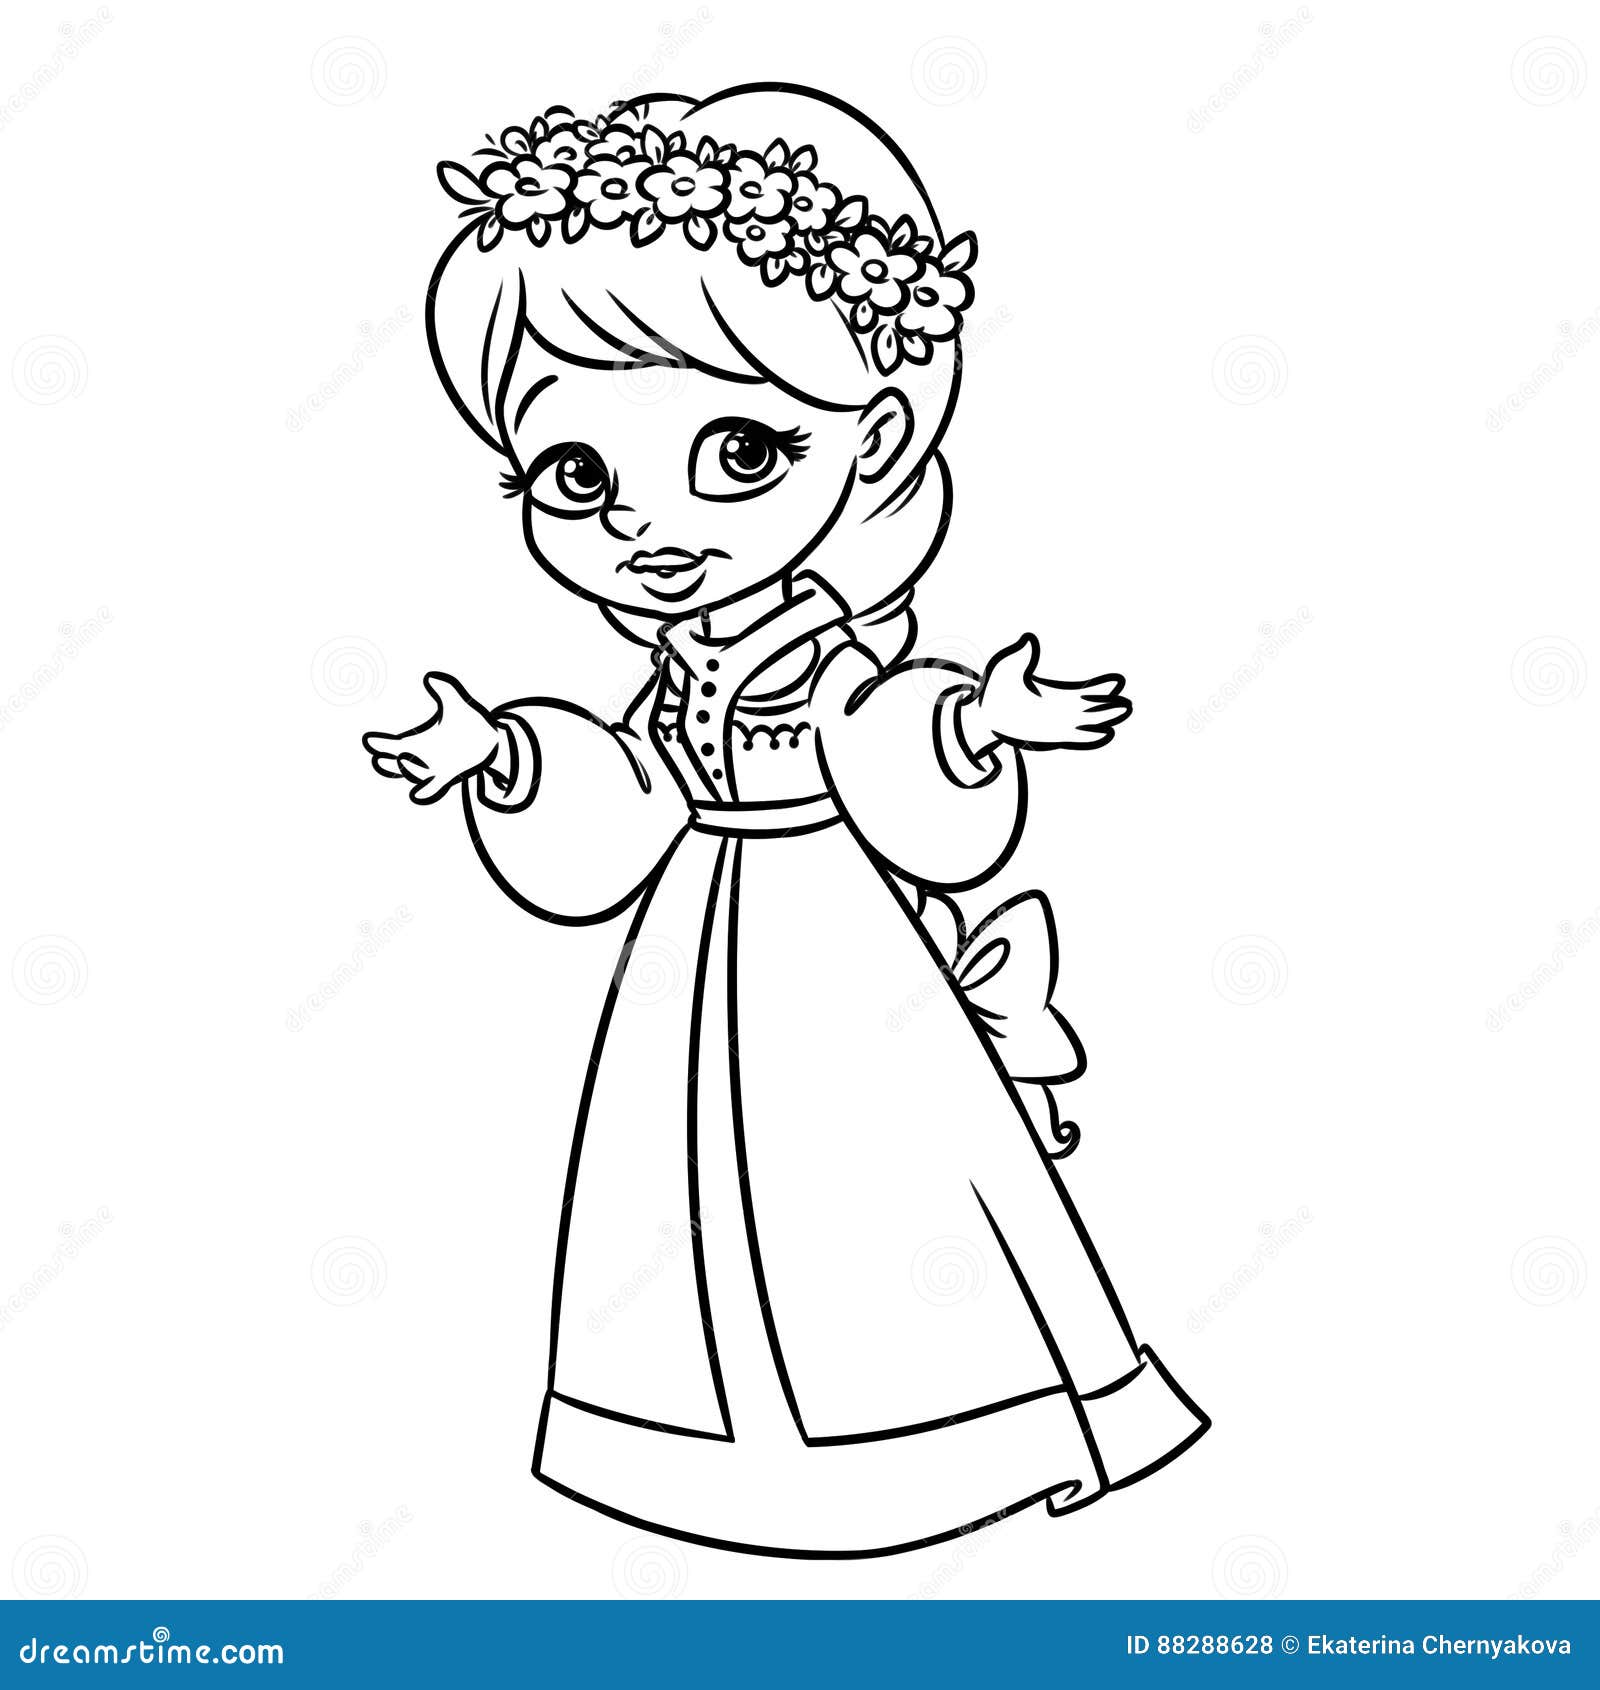 Girl Coloring Page Cartoon Illustrations Stock Illustration - Illustration  of spring, dress: 88288628